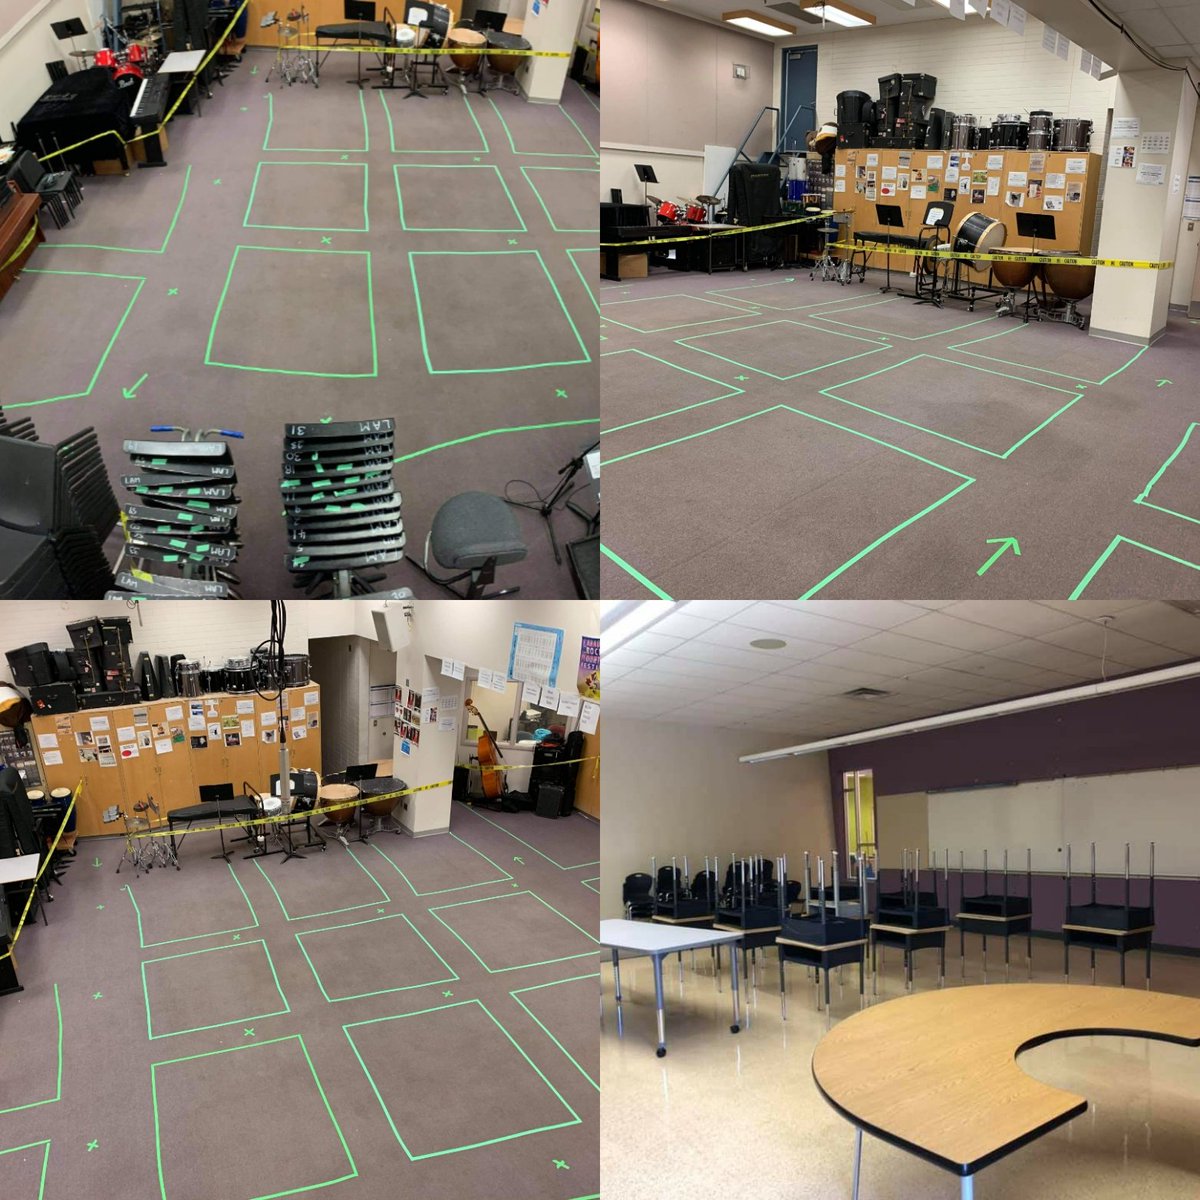 What you will notice in all the pictures, there is simply no way to fit even 20 students into any type of classroom: band room, portable to regular size room. We teachers spent agonizing days trying to configure our rooms for June and for Sept.  @adriandix  @jjhorgan